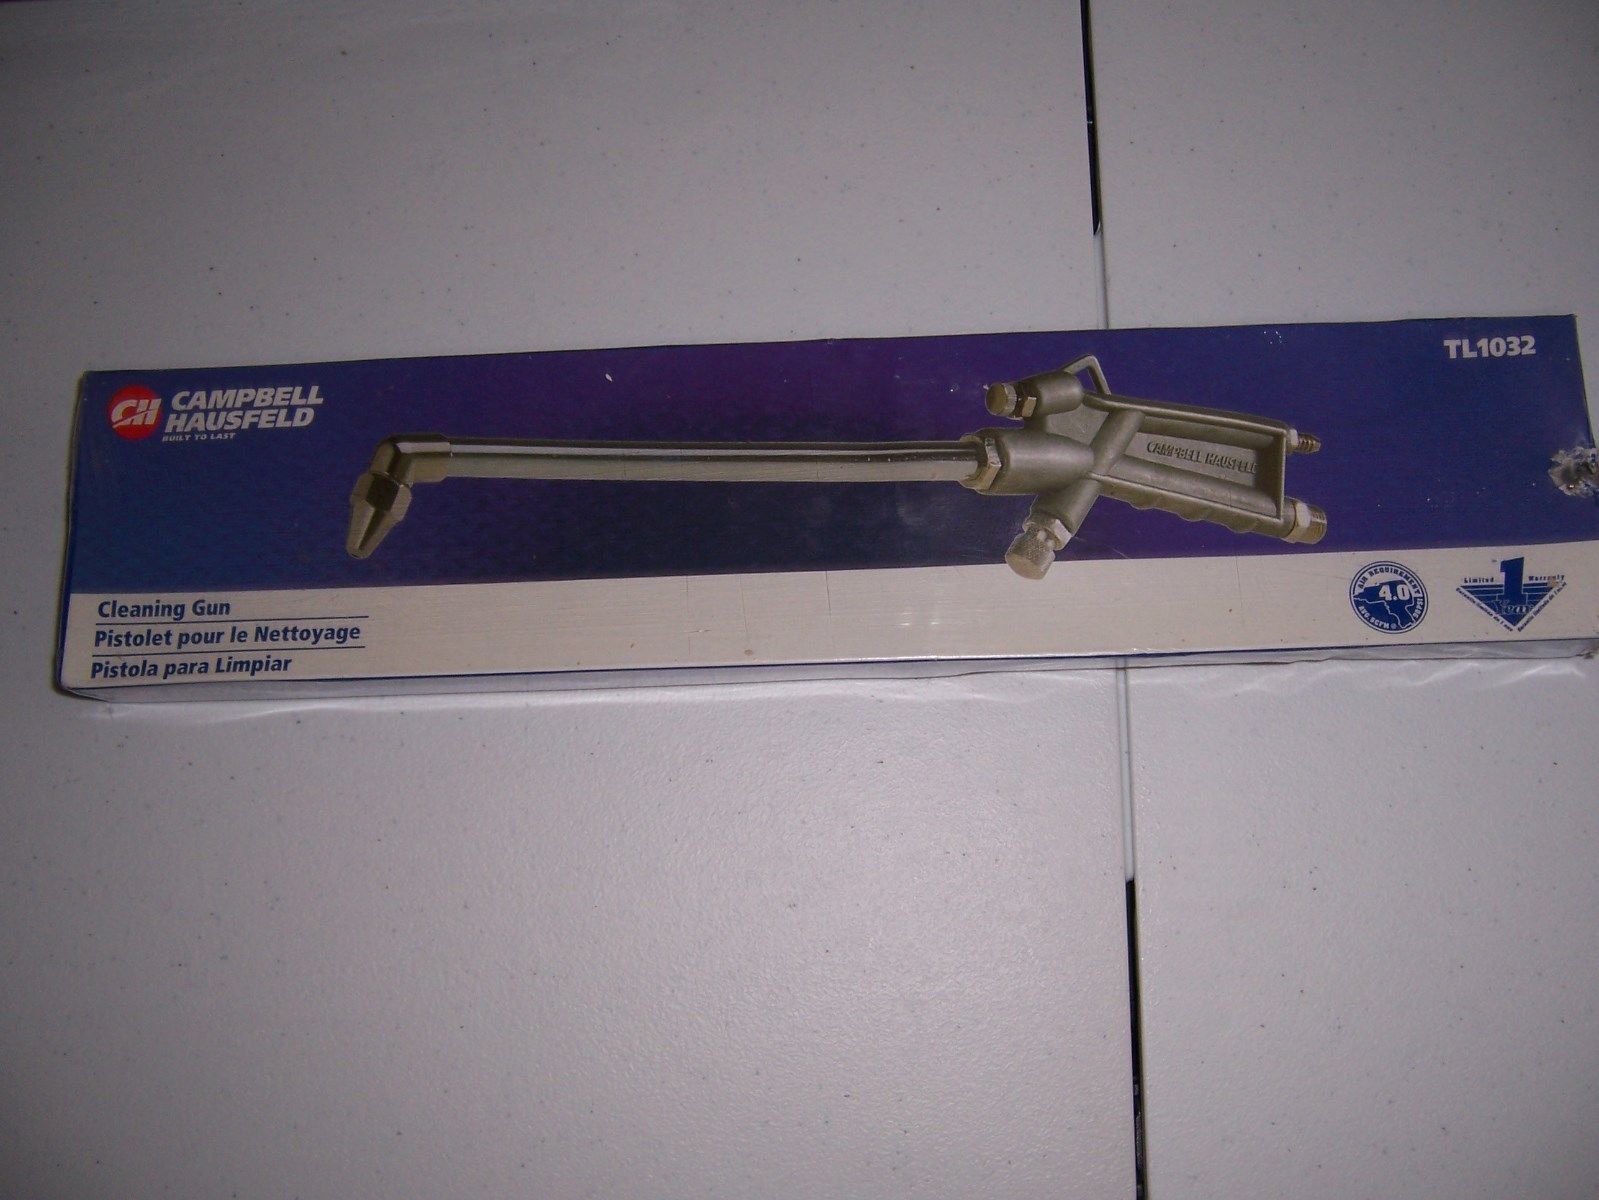 NEW IN PACKAGE CAMPBELL HAUSFELD TL1032 CLEANING GUN - $11.99